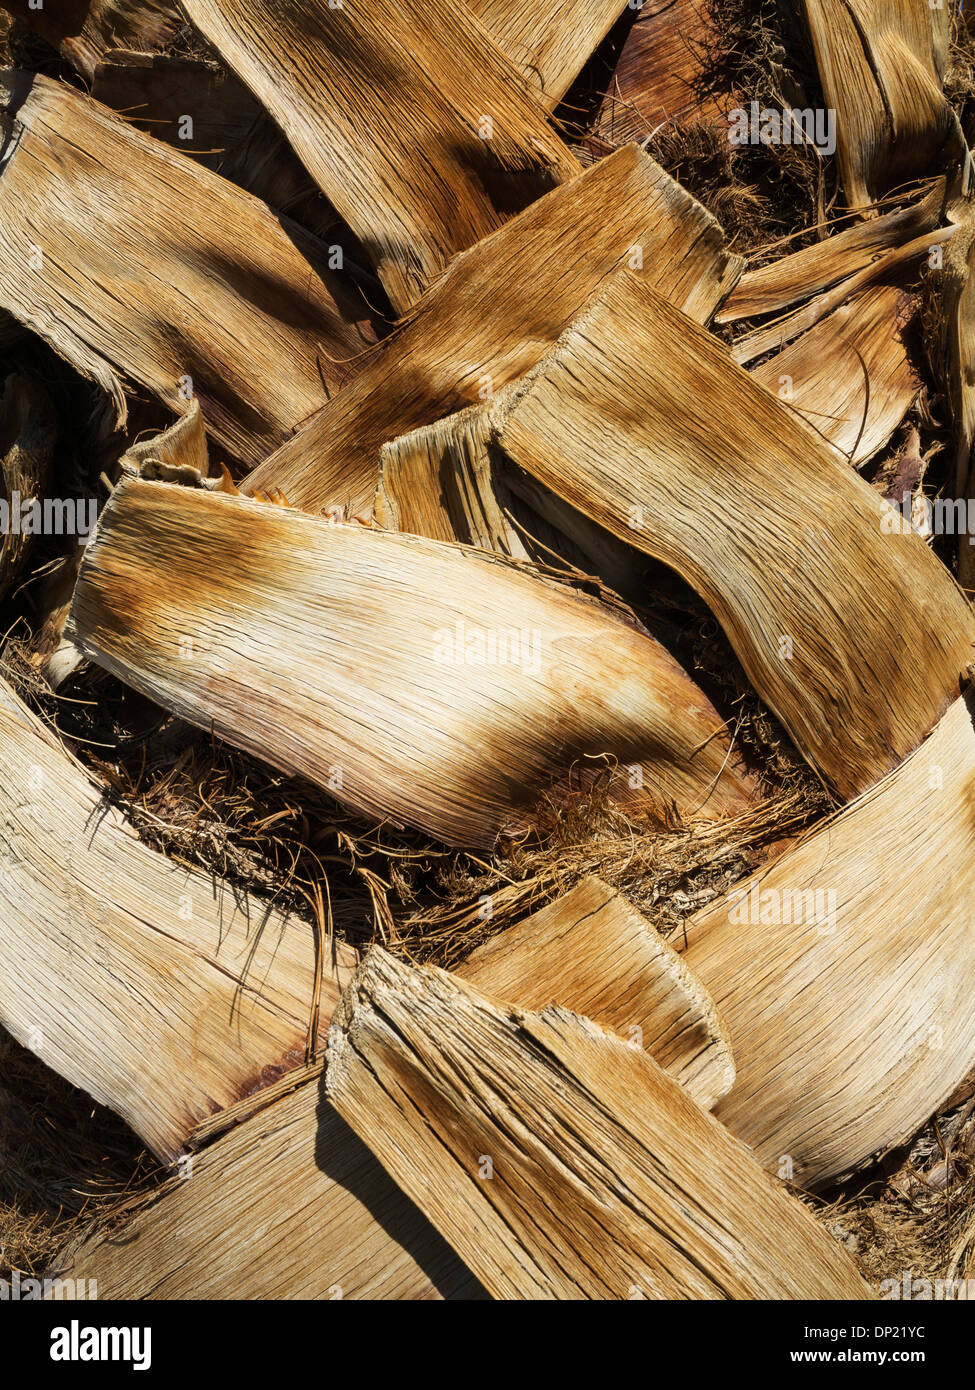 California Fan Palm (Washingtonia filifera), detailed view of the bark with pruned leaves, Death Valley National Park Stock Photo